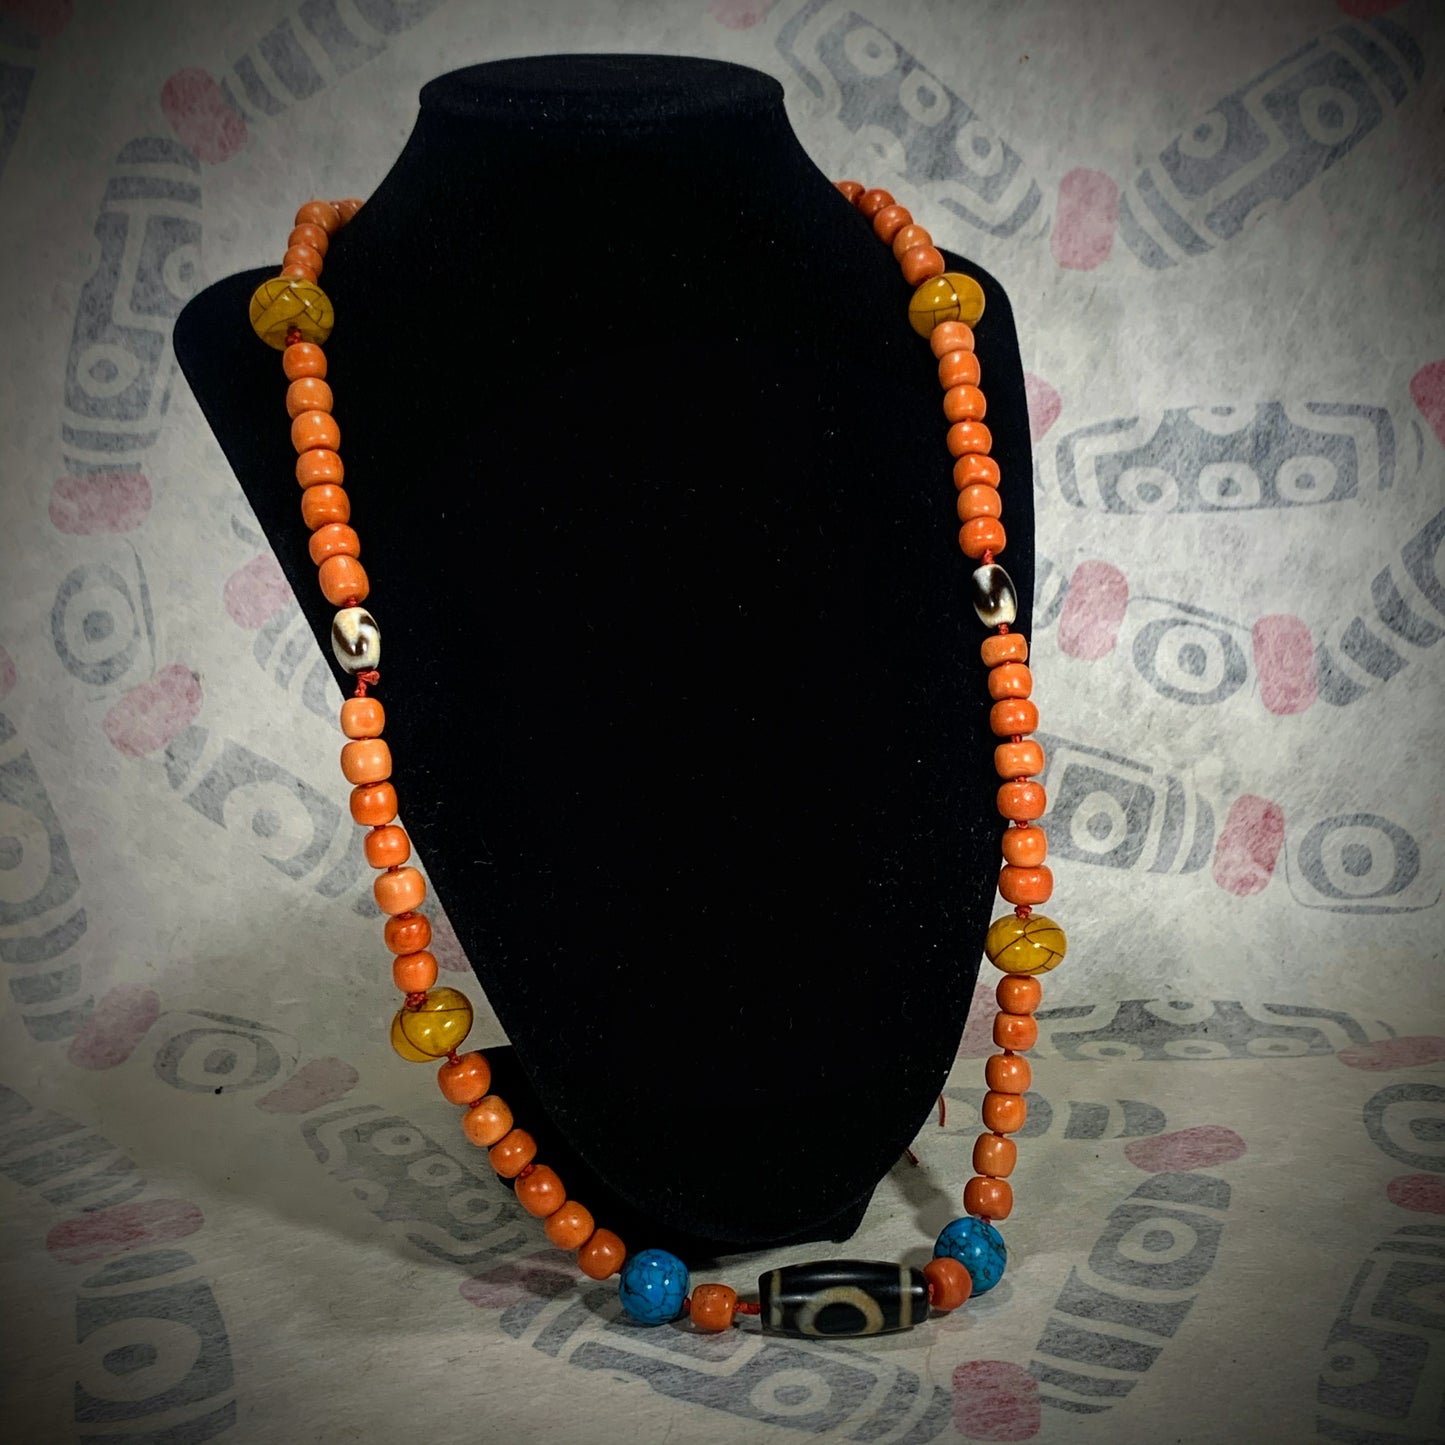 Necklace with vintage beads